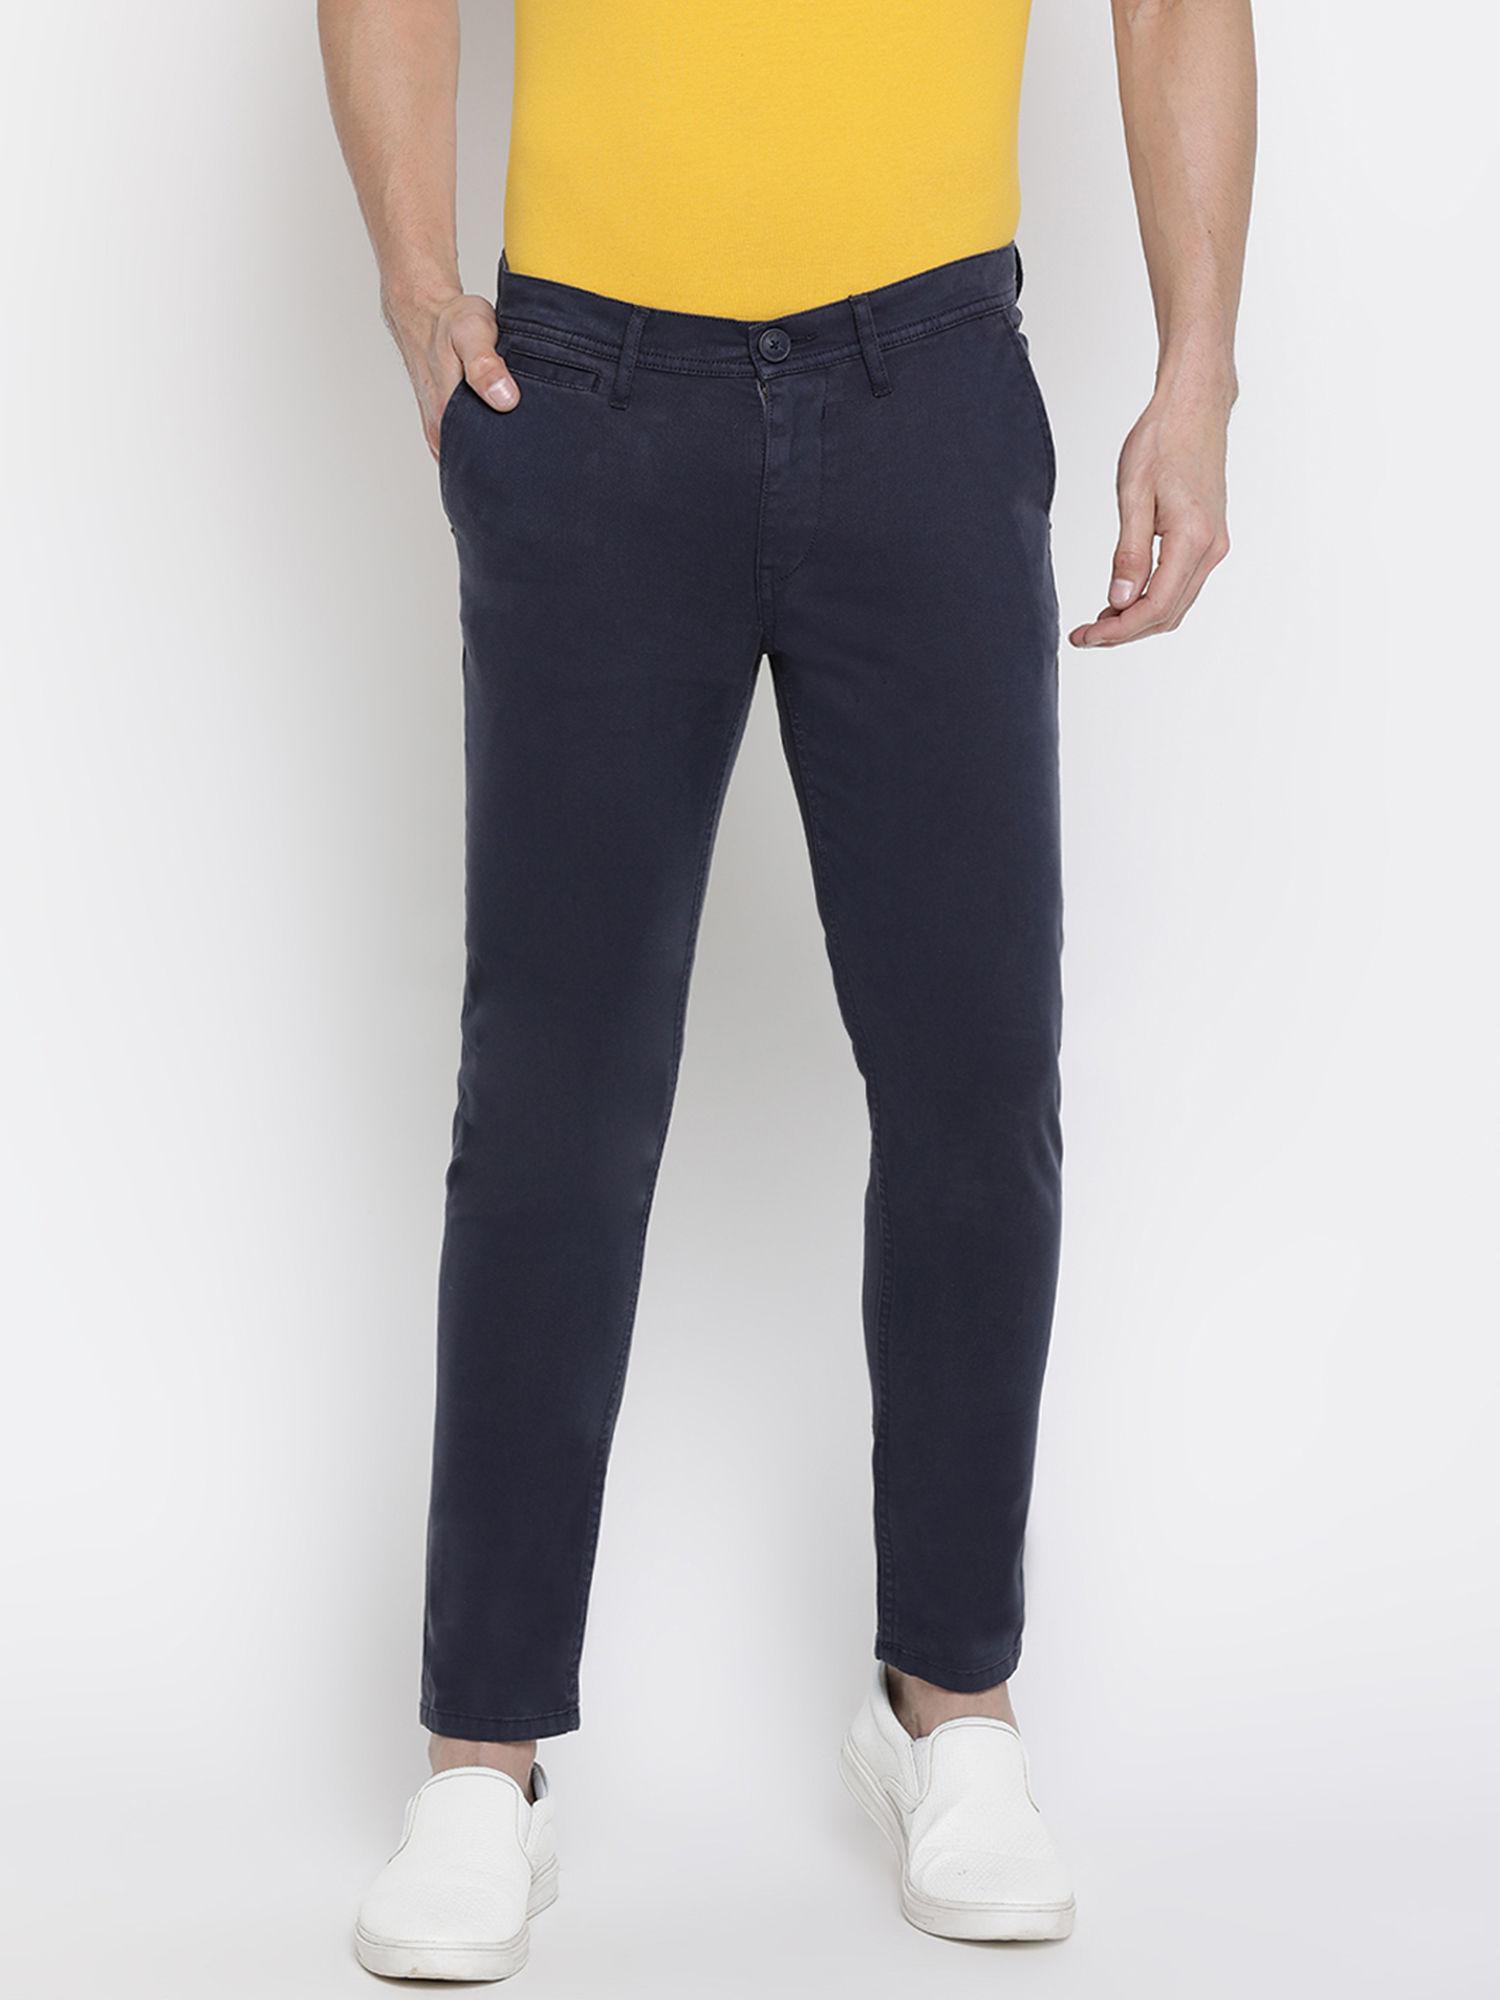 navy solid trouser